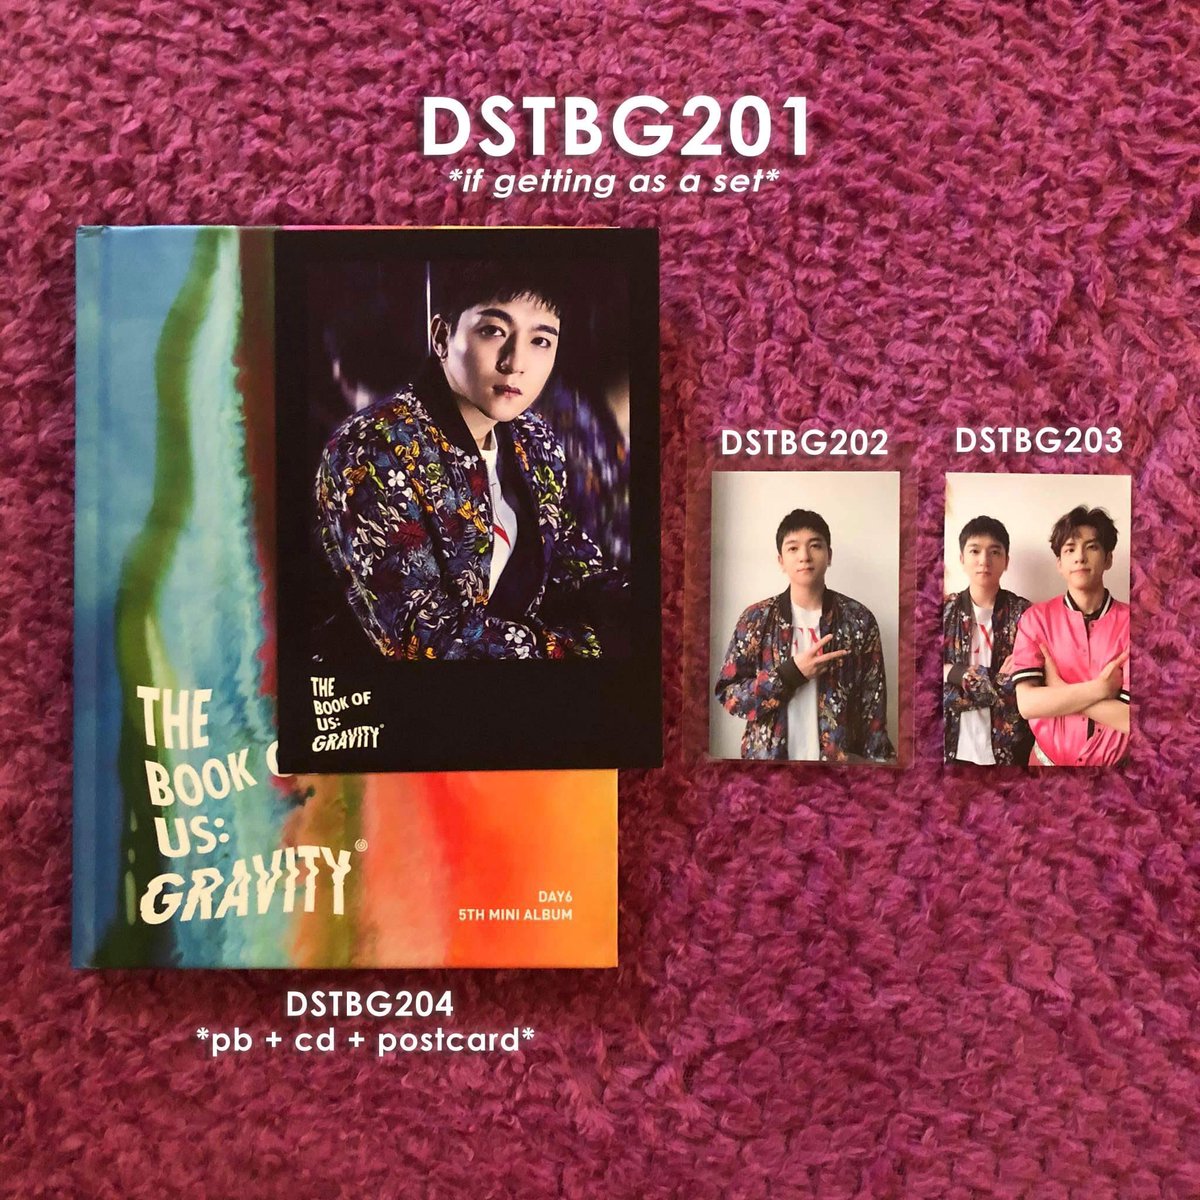 wts / lfbday6 albums (set / tingi)— tbou : gravity (soul, mate ver) lapag : april 12 - 6pm complete list, prices & photos : see tweet at the start of this thread ph sungjin jae youngk wonpil dowoon pc photocard unsealed bookmarks